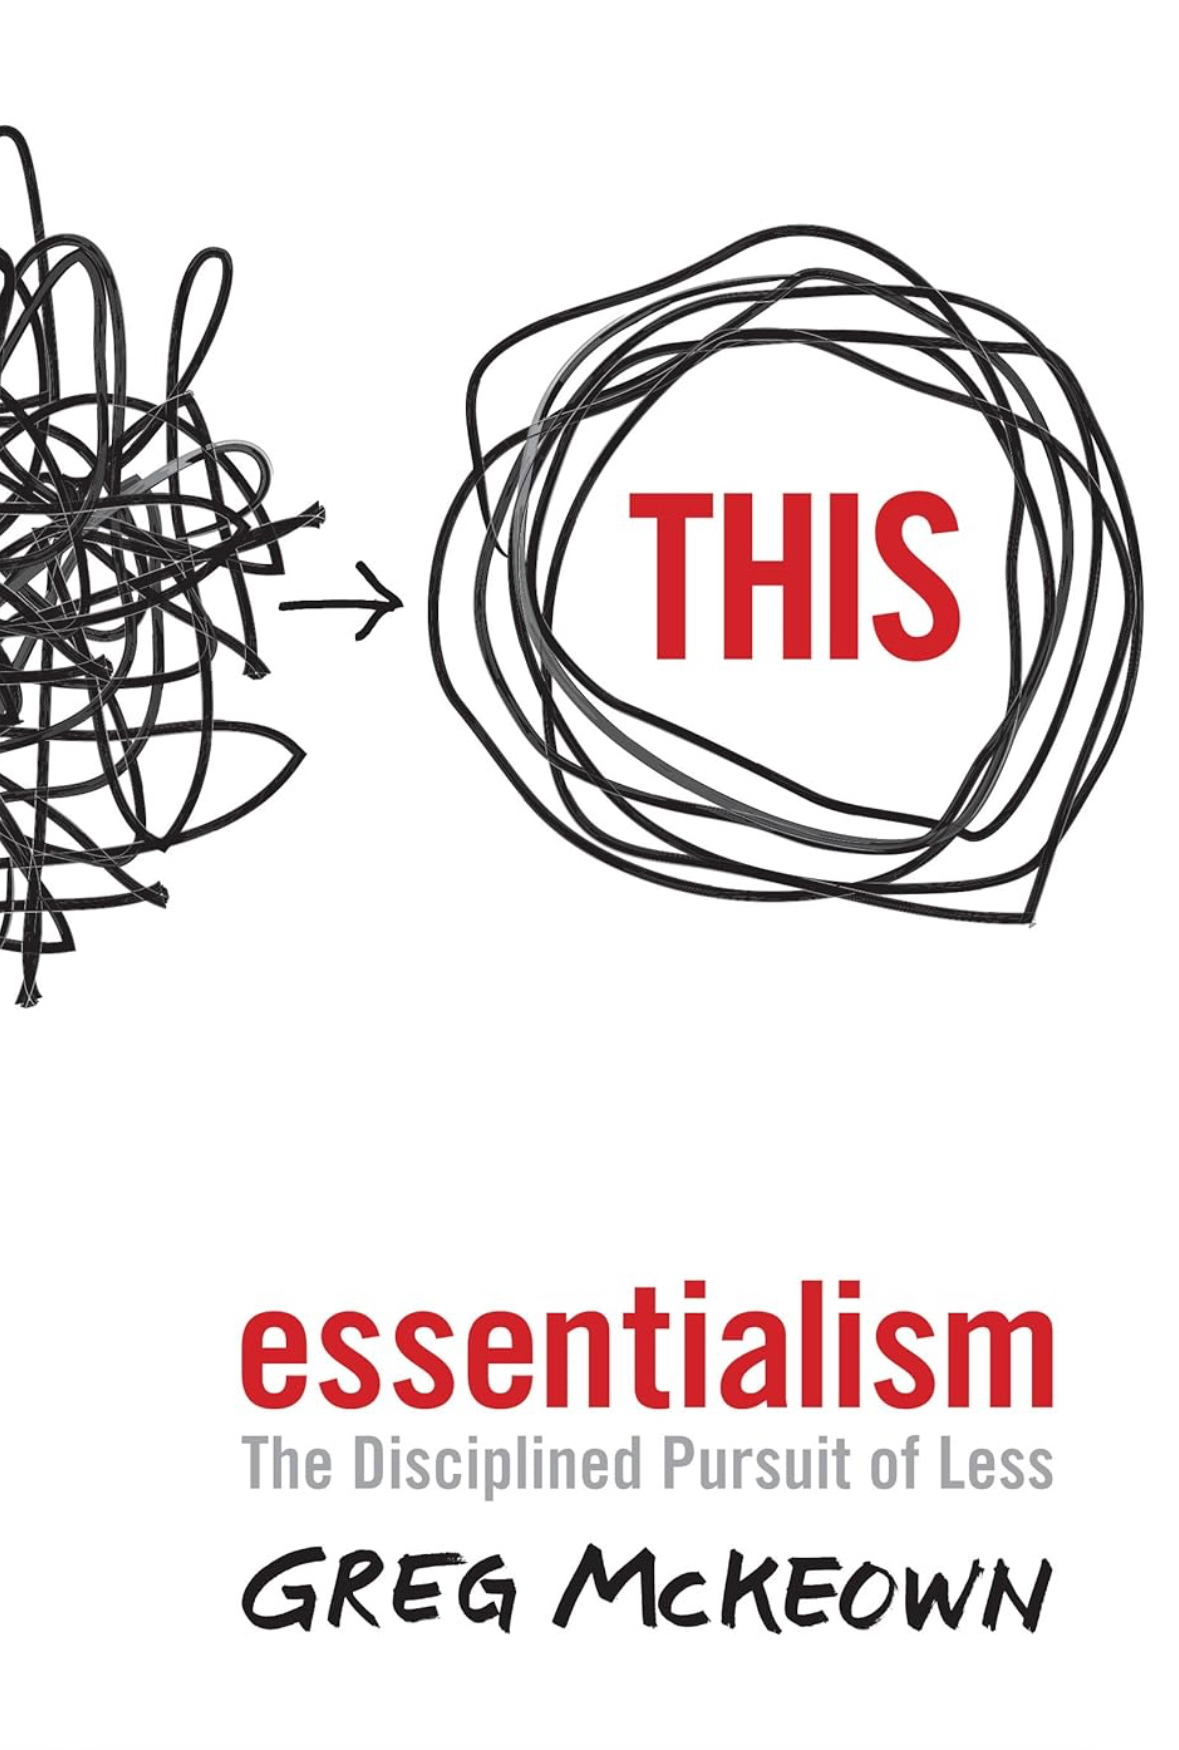 Image of the book Essentialism by Gregory McKeown. 